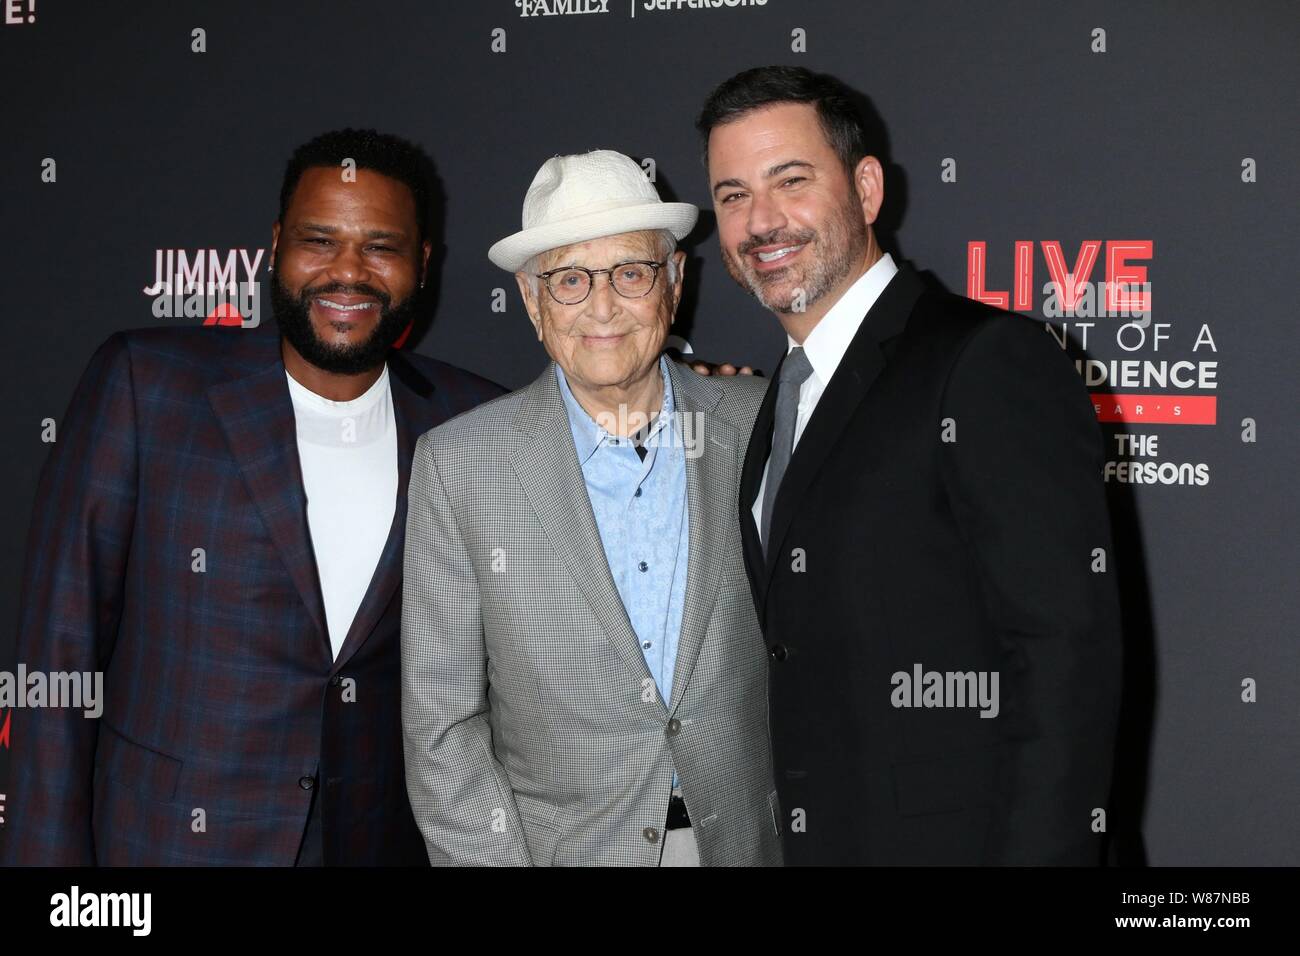 Los Angeles, CA. 7th Aug, 2019. Anthony Anderson, Norman Lear, Jimmy Kimmel at arrivals for An Evening With Jimmy Kimmel, The Hollywood Roosevelt Hotel, Los Angeles, CA August 7, 2019. Credit: Priscilla Grant/Everett Collection/Alamy Live News Stock Photo